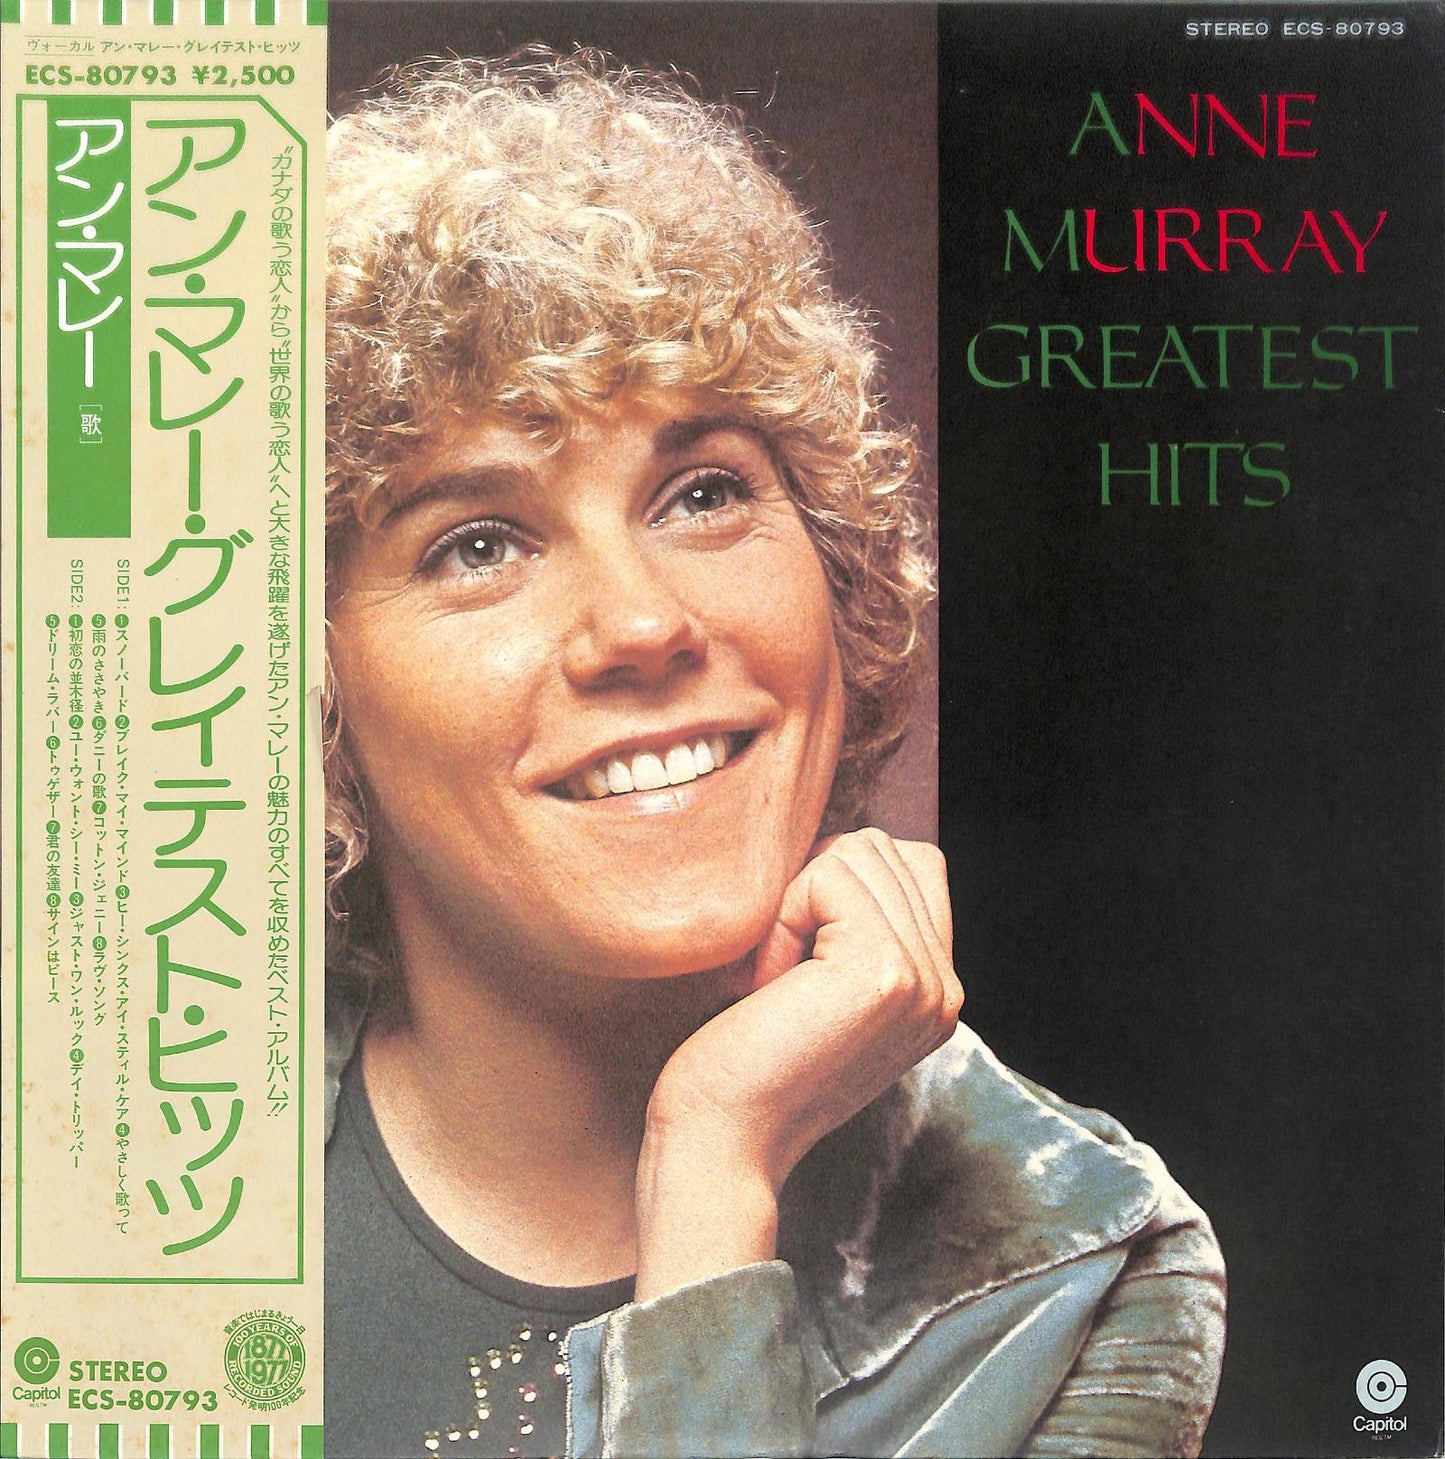 ANNE MURRAY - Greatest Hits